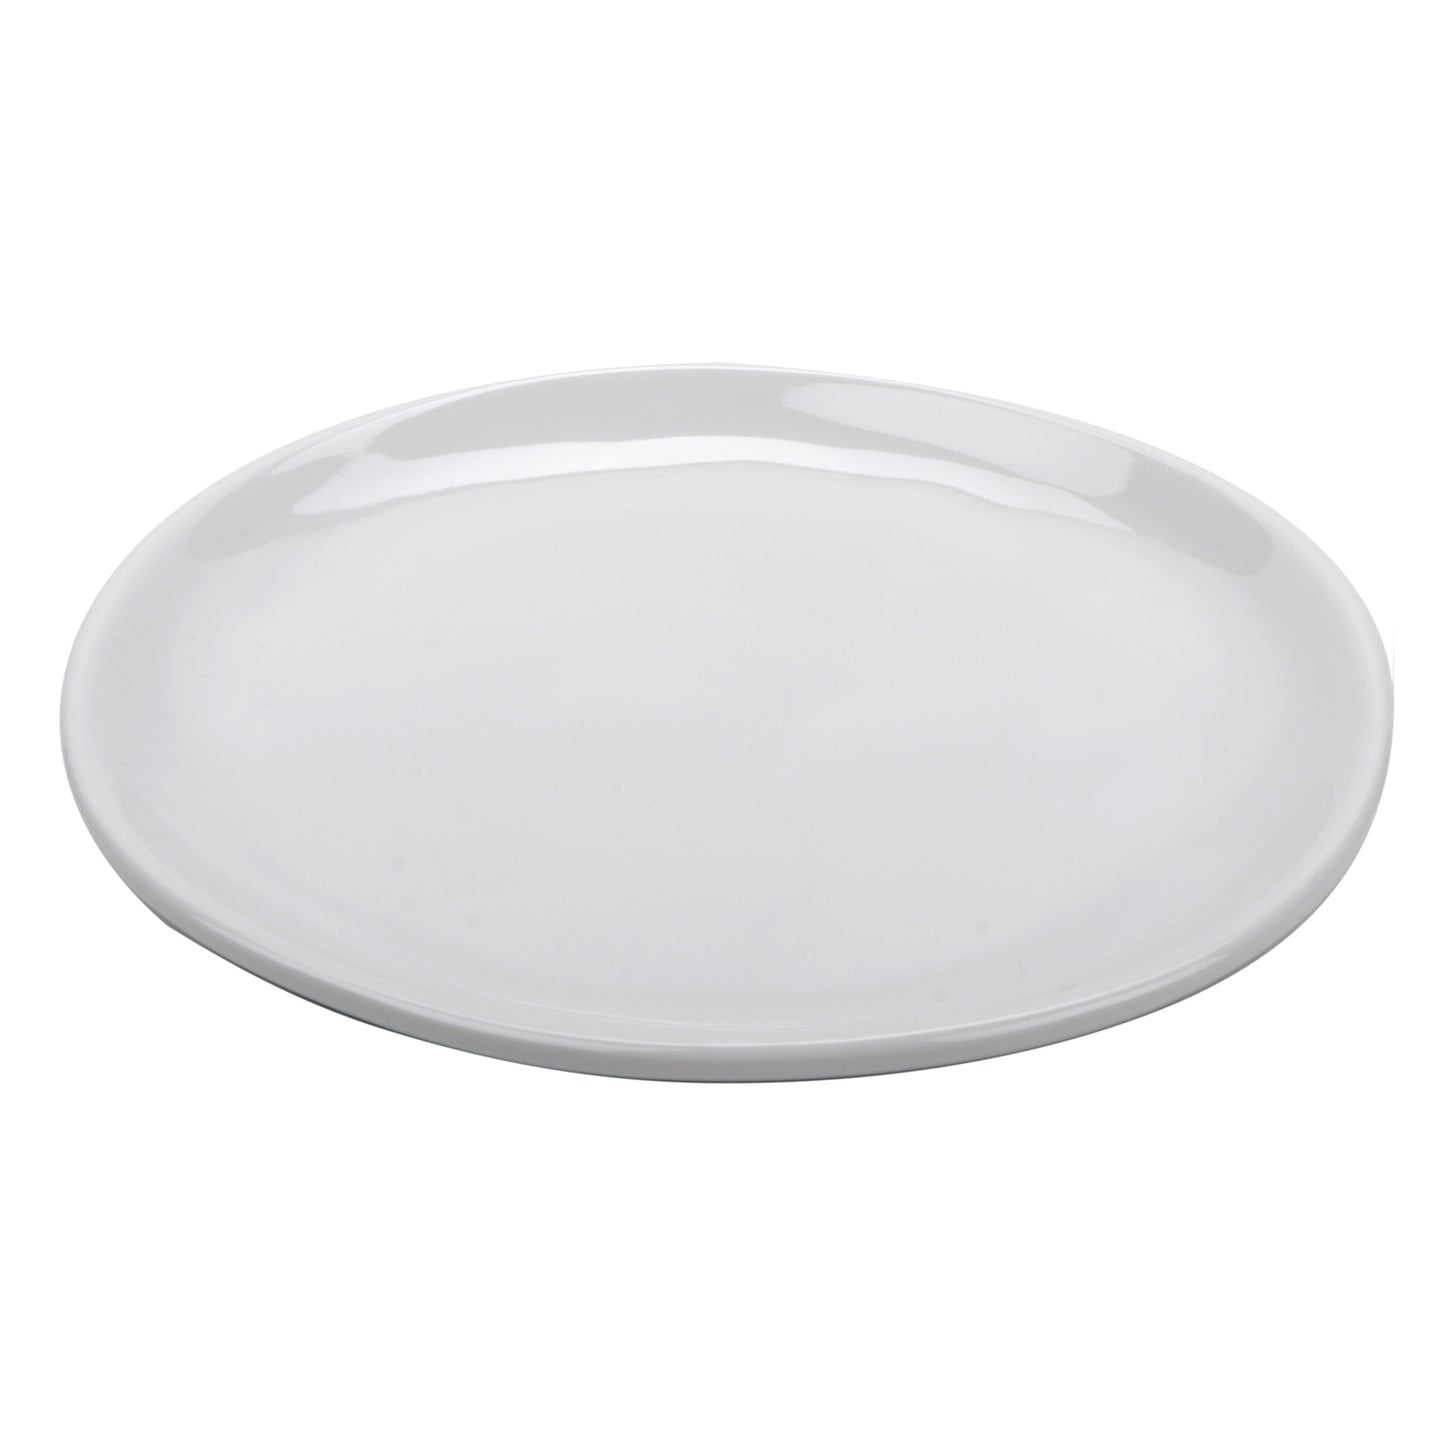 7" Melamine, Irregular Round Coupe Plate, G.E.T. Arctic Mill (12 Pack)